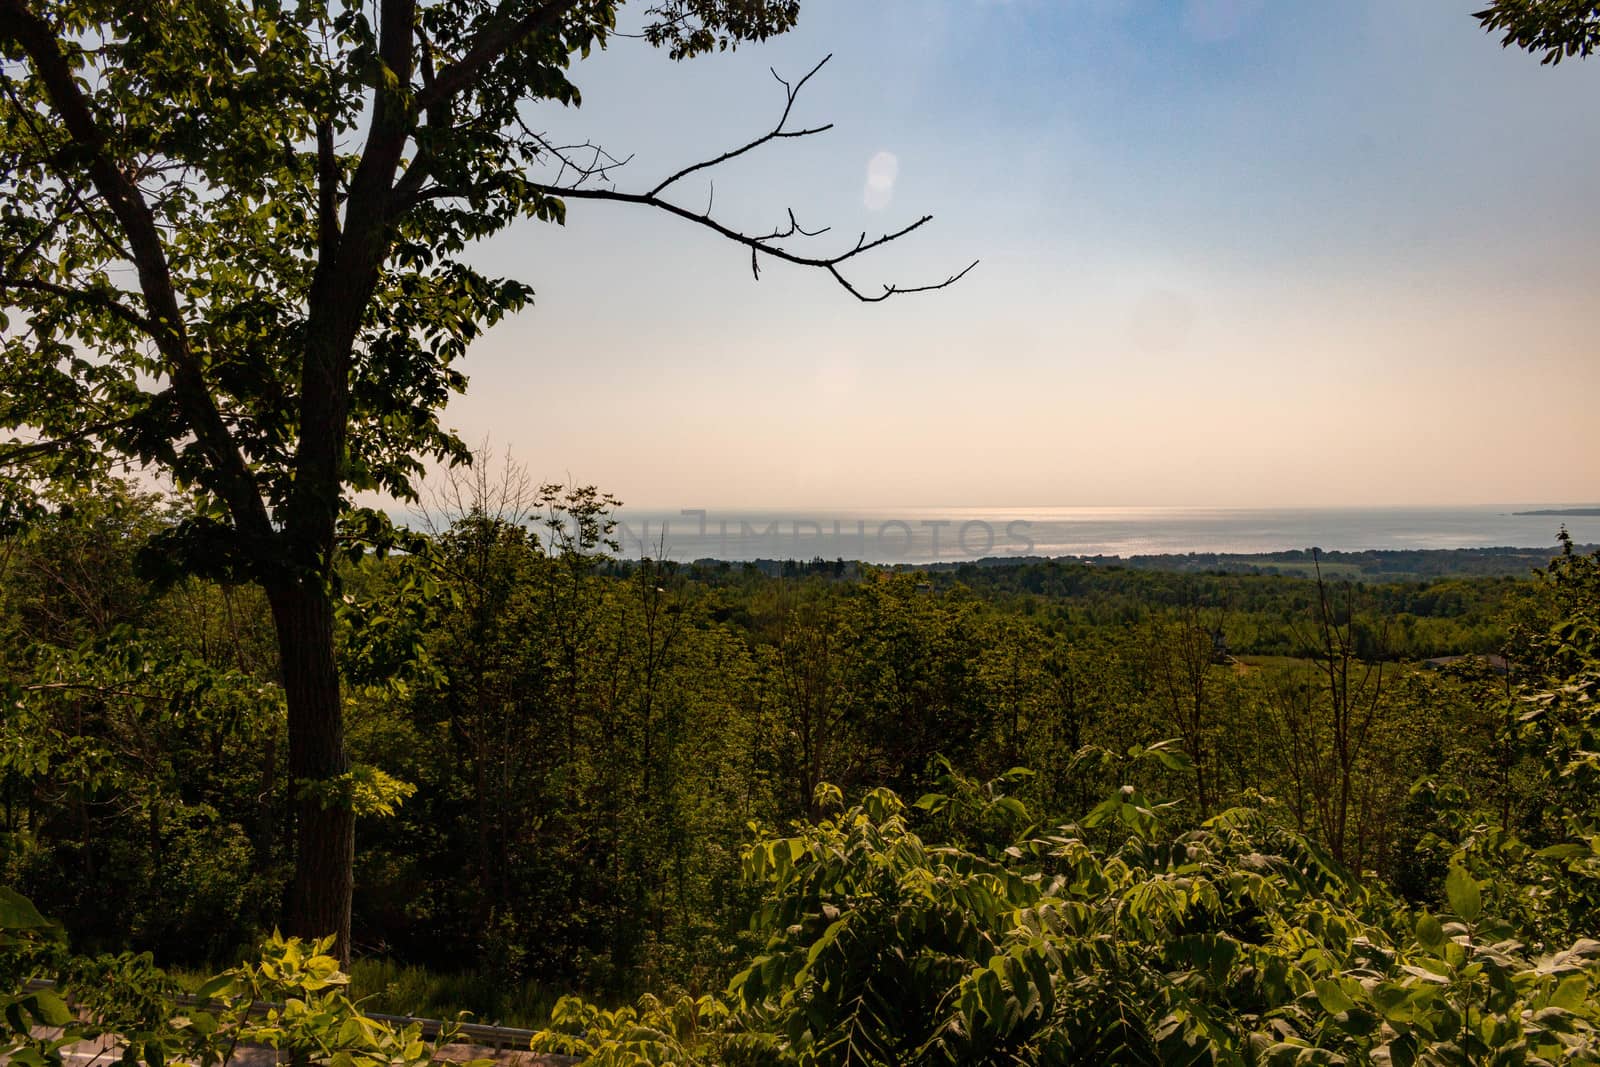 View of meaford ontario in panoramic formatting.